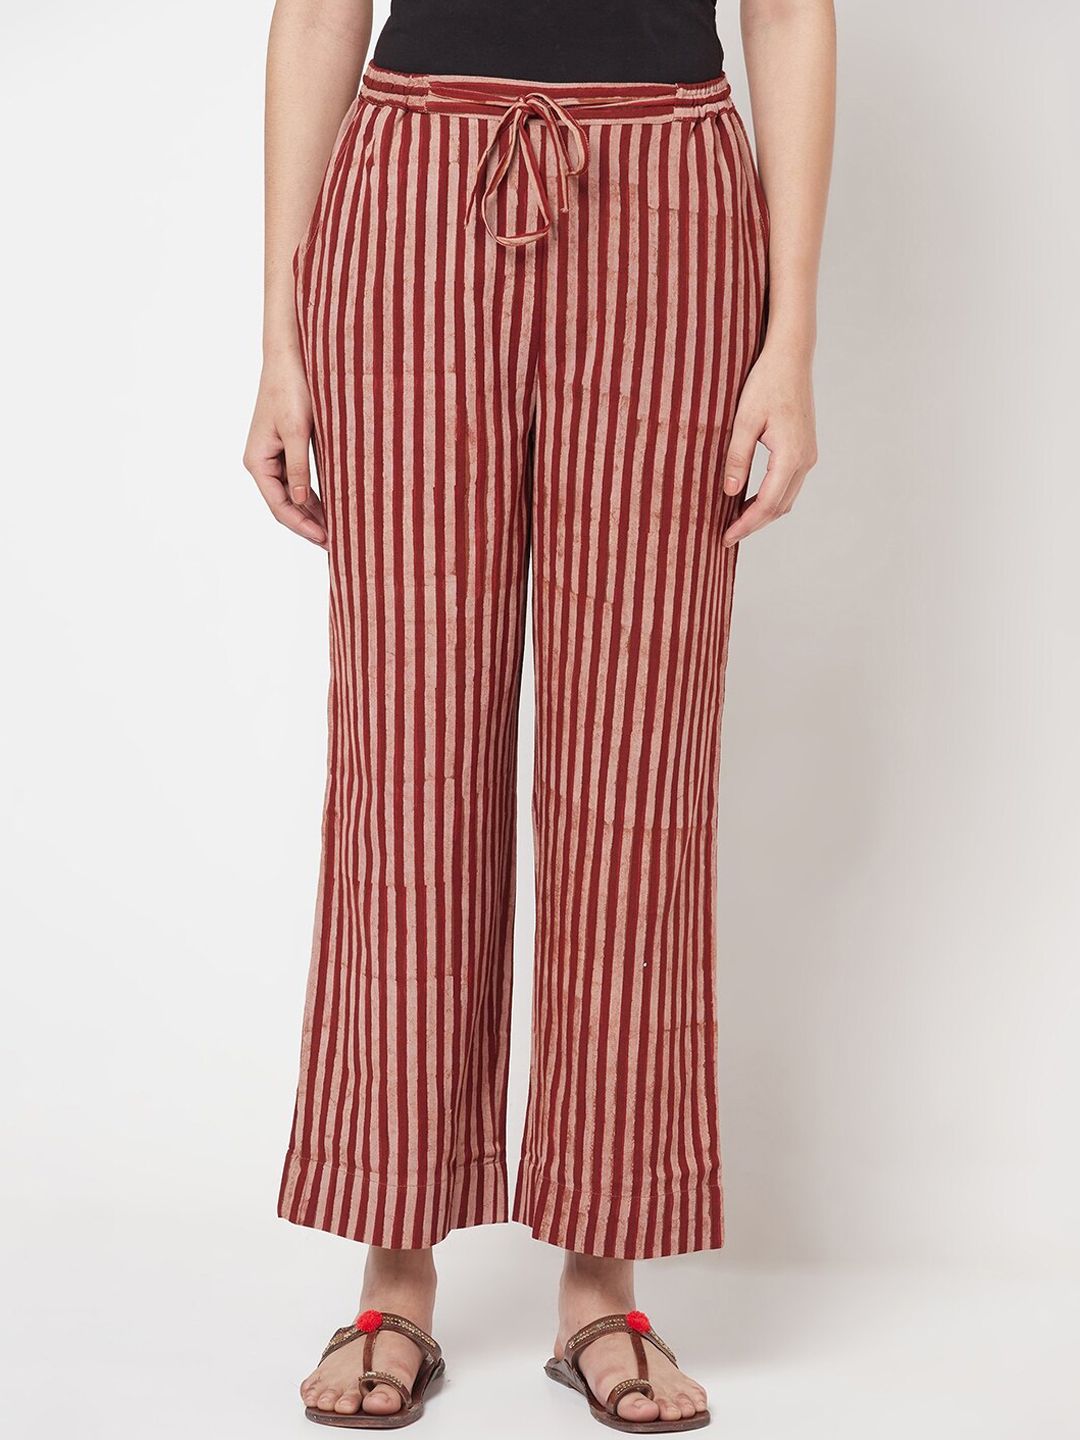 Fabindia Women Beige & Red Striped Cotton Regular Trousers Price in India